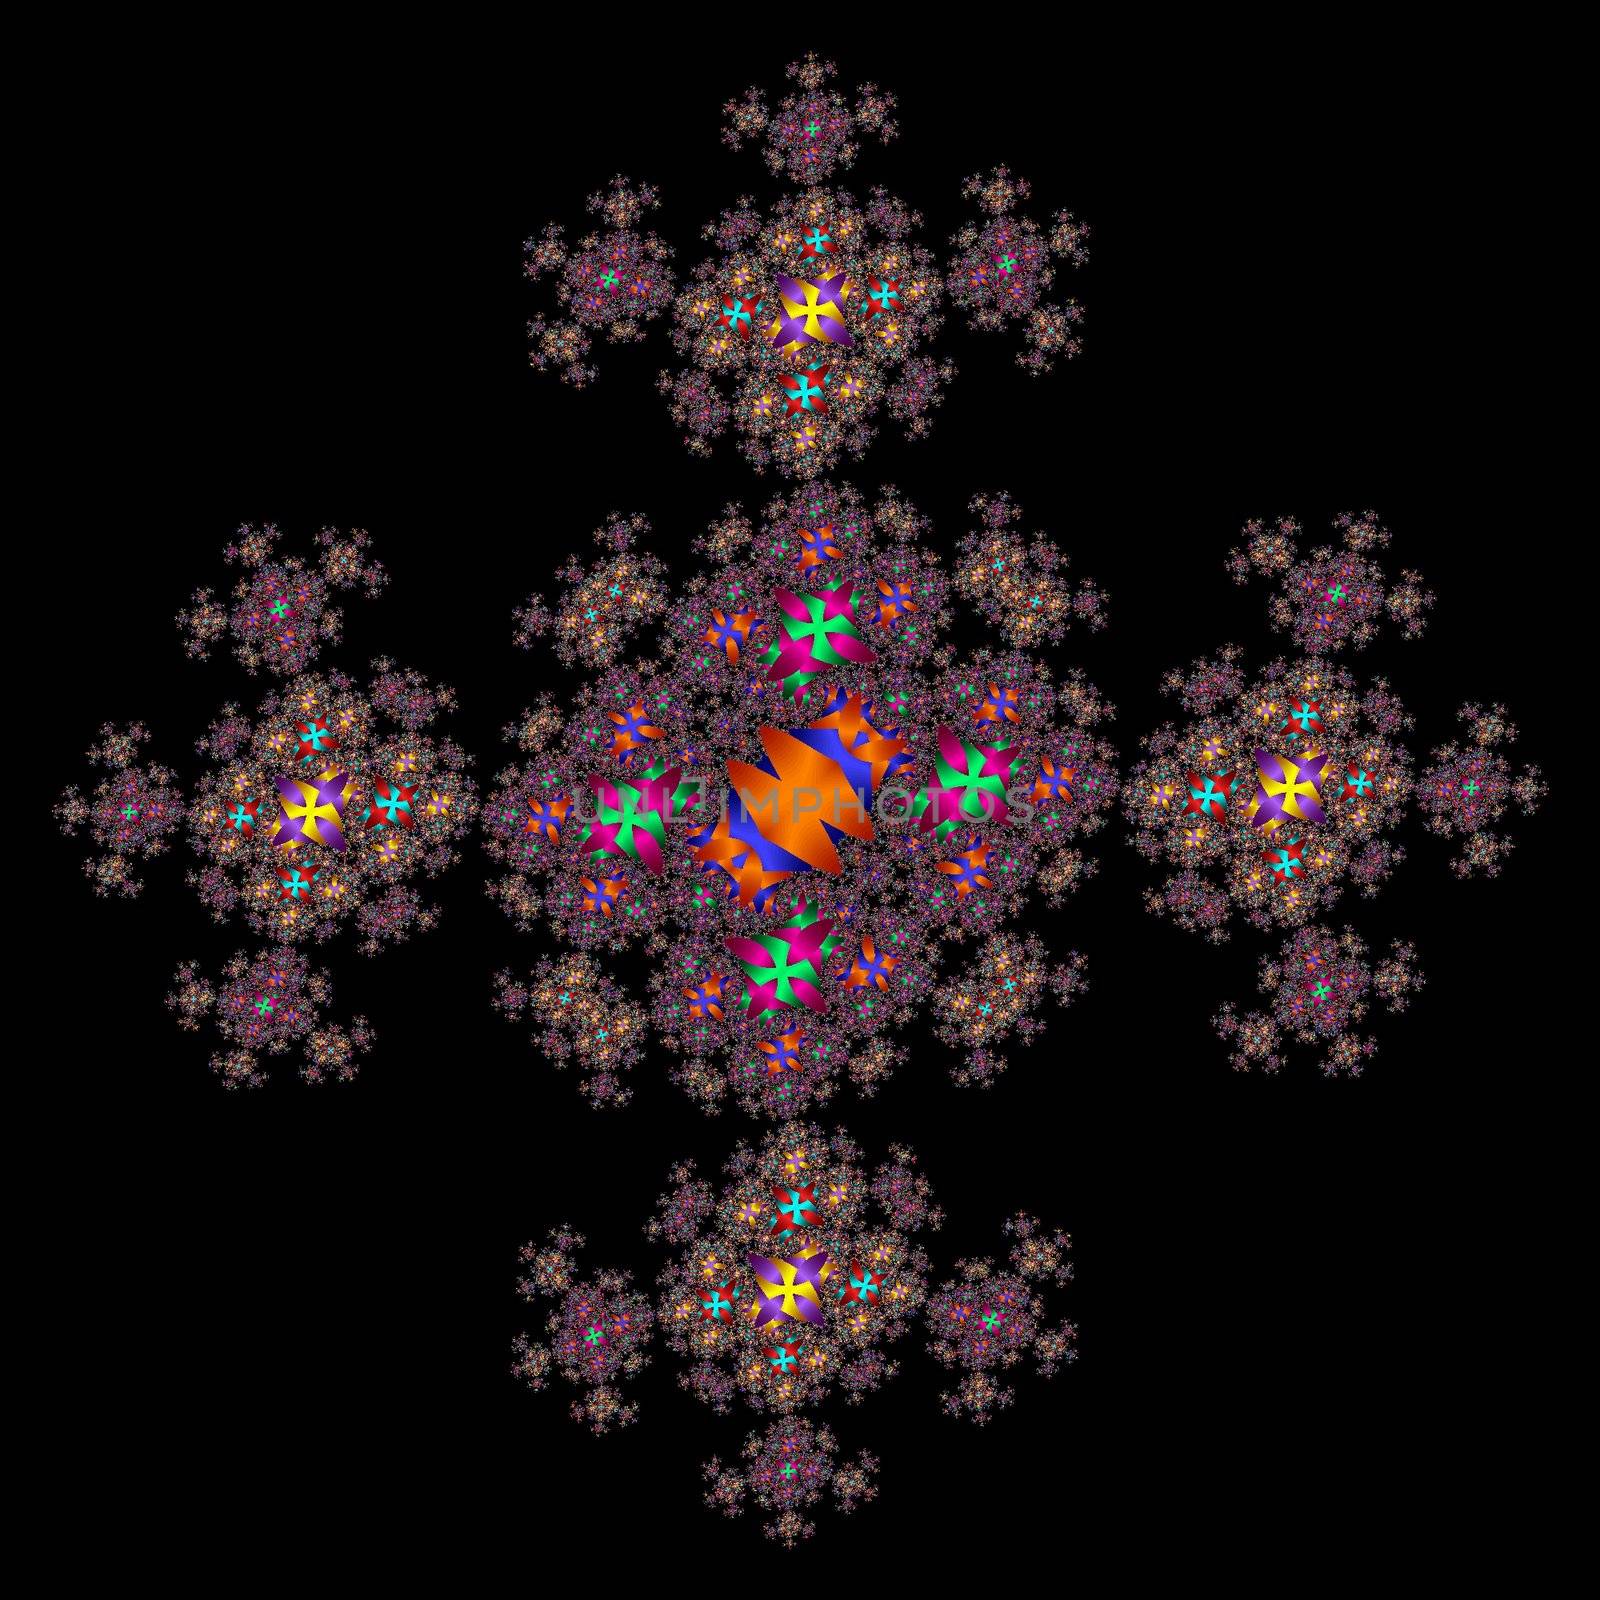 very colorful fractal cross over black